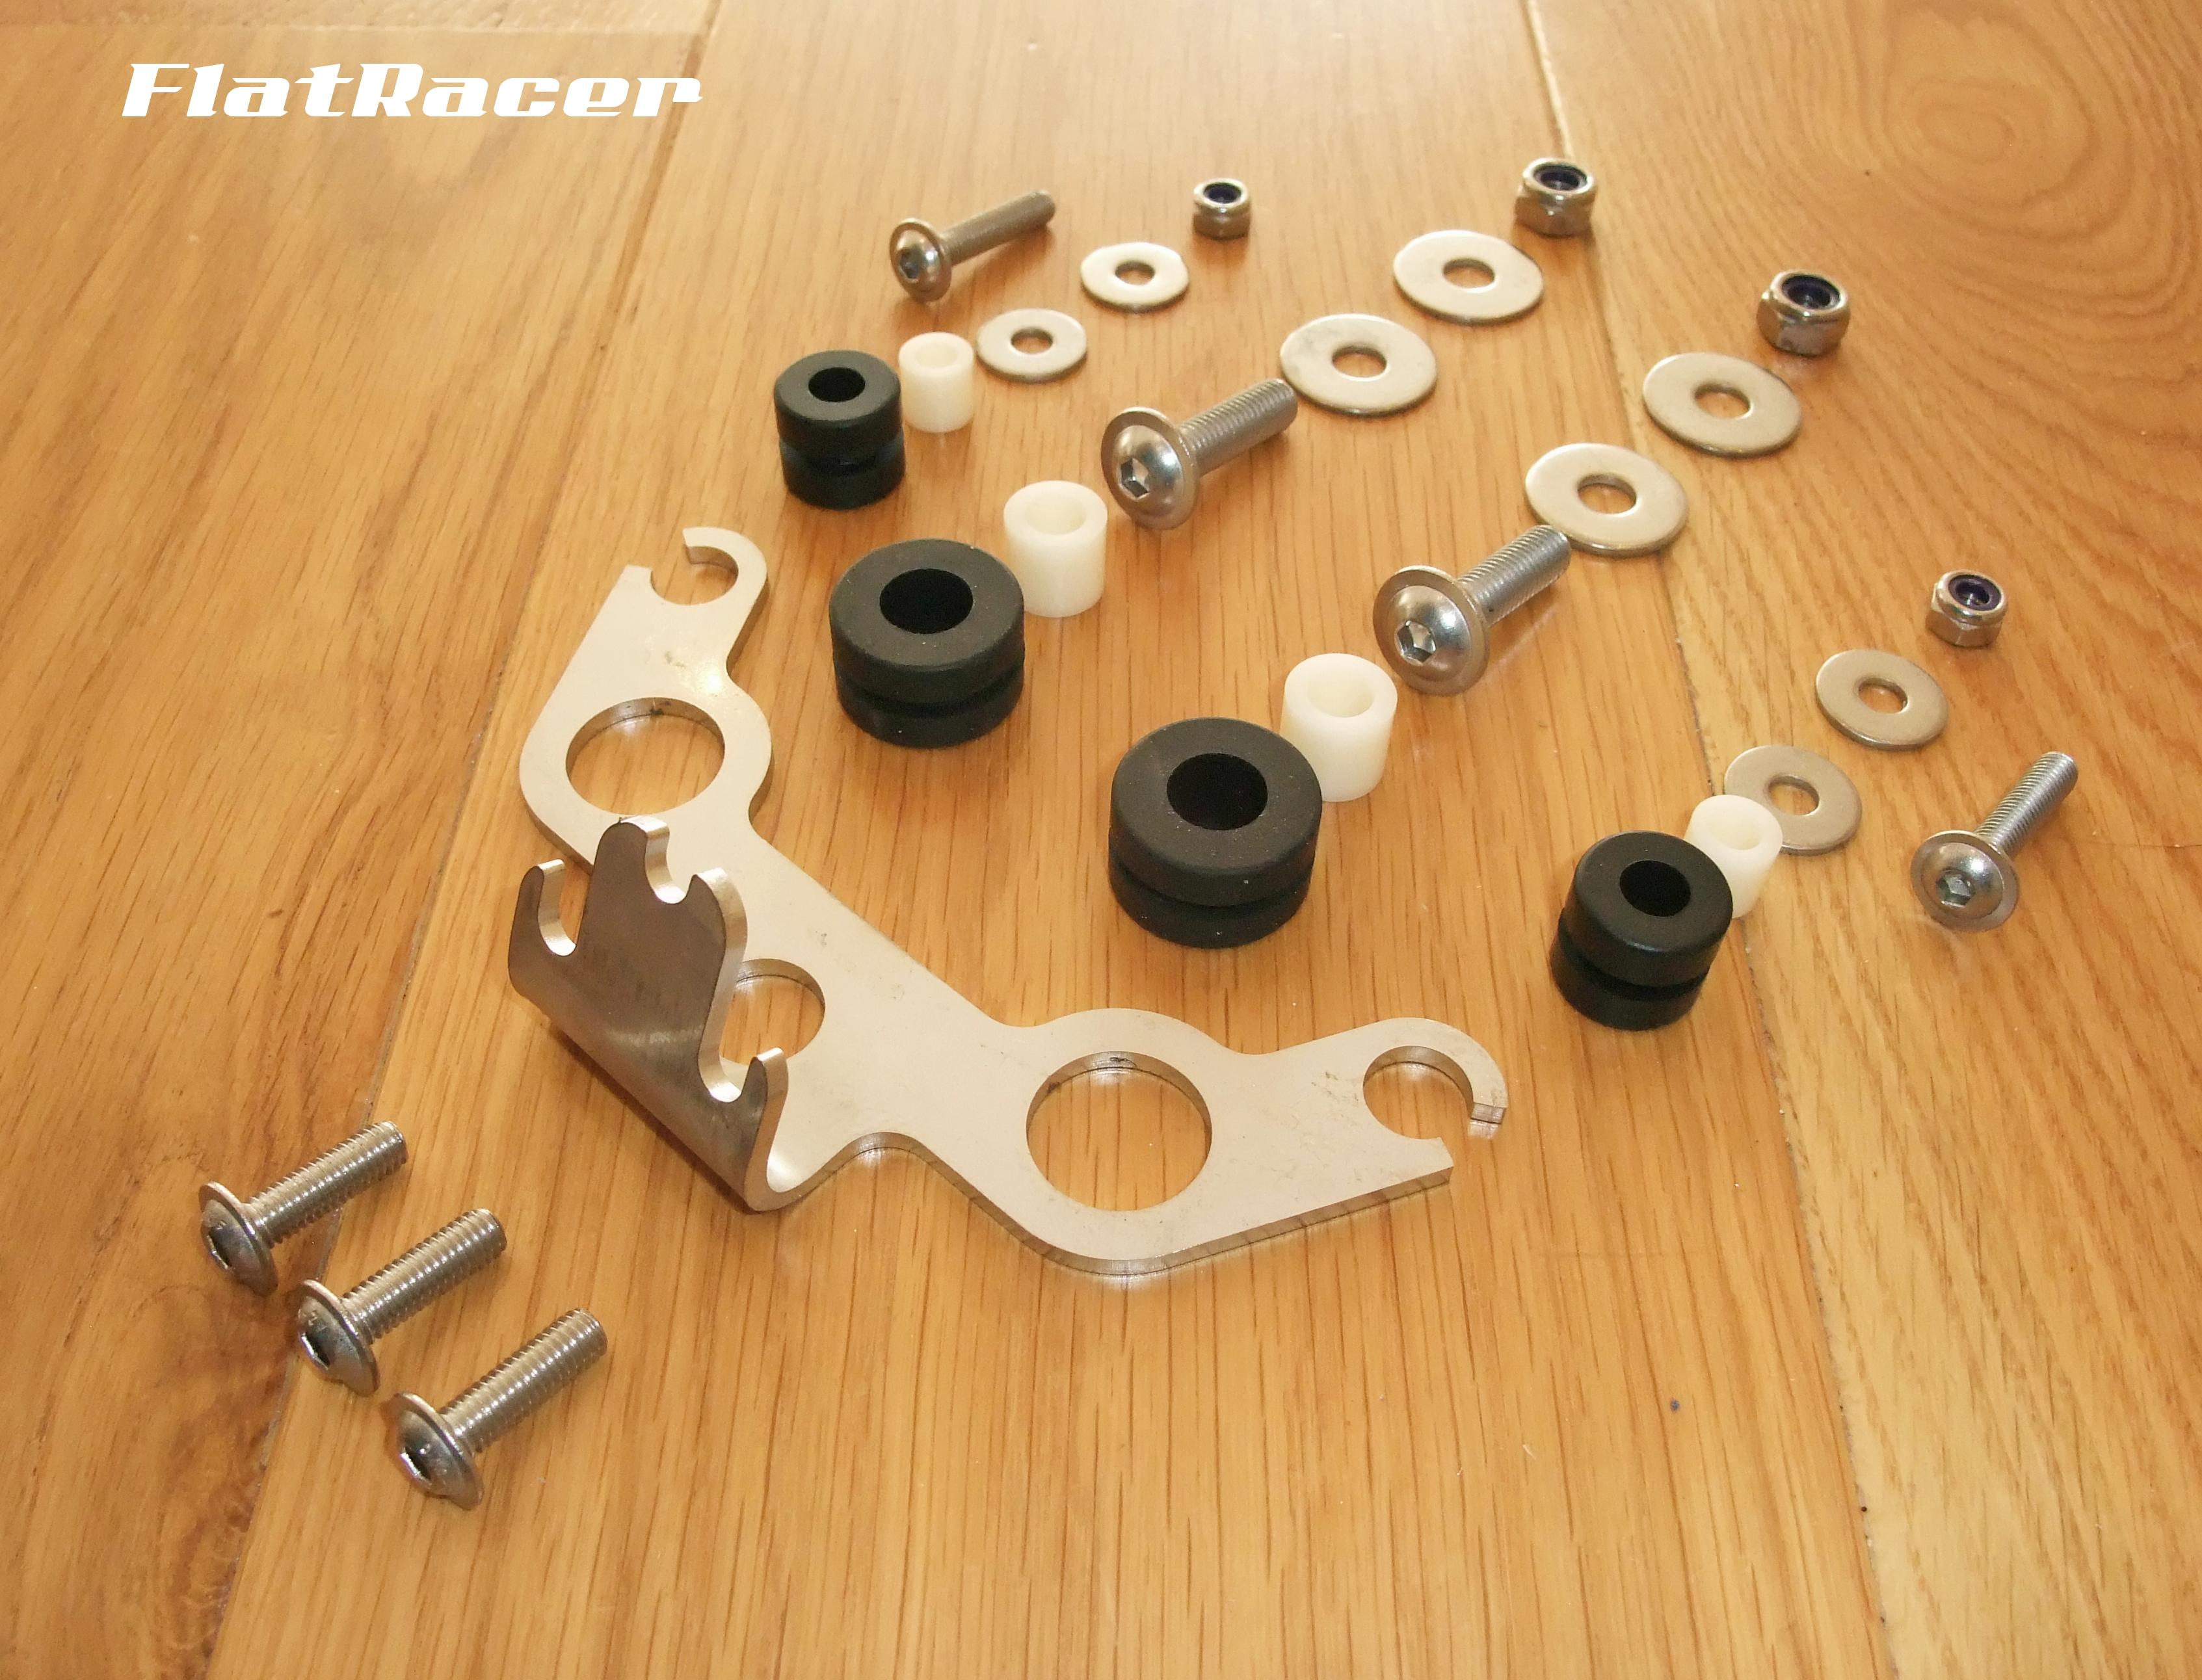 FlatRacer BMW Airhead Boxer stainless steel ultra-low instrument cluster bracket - with fittings